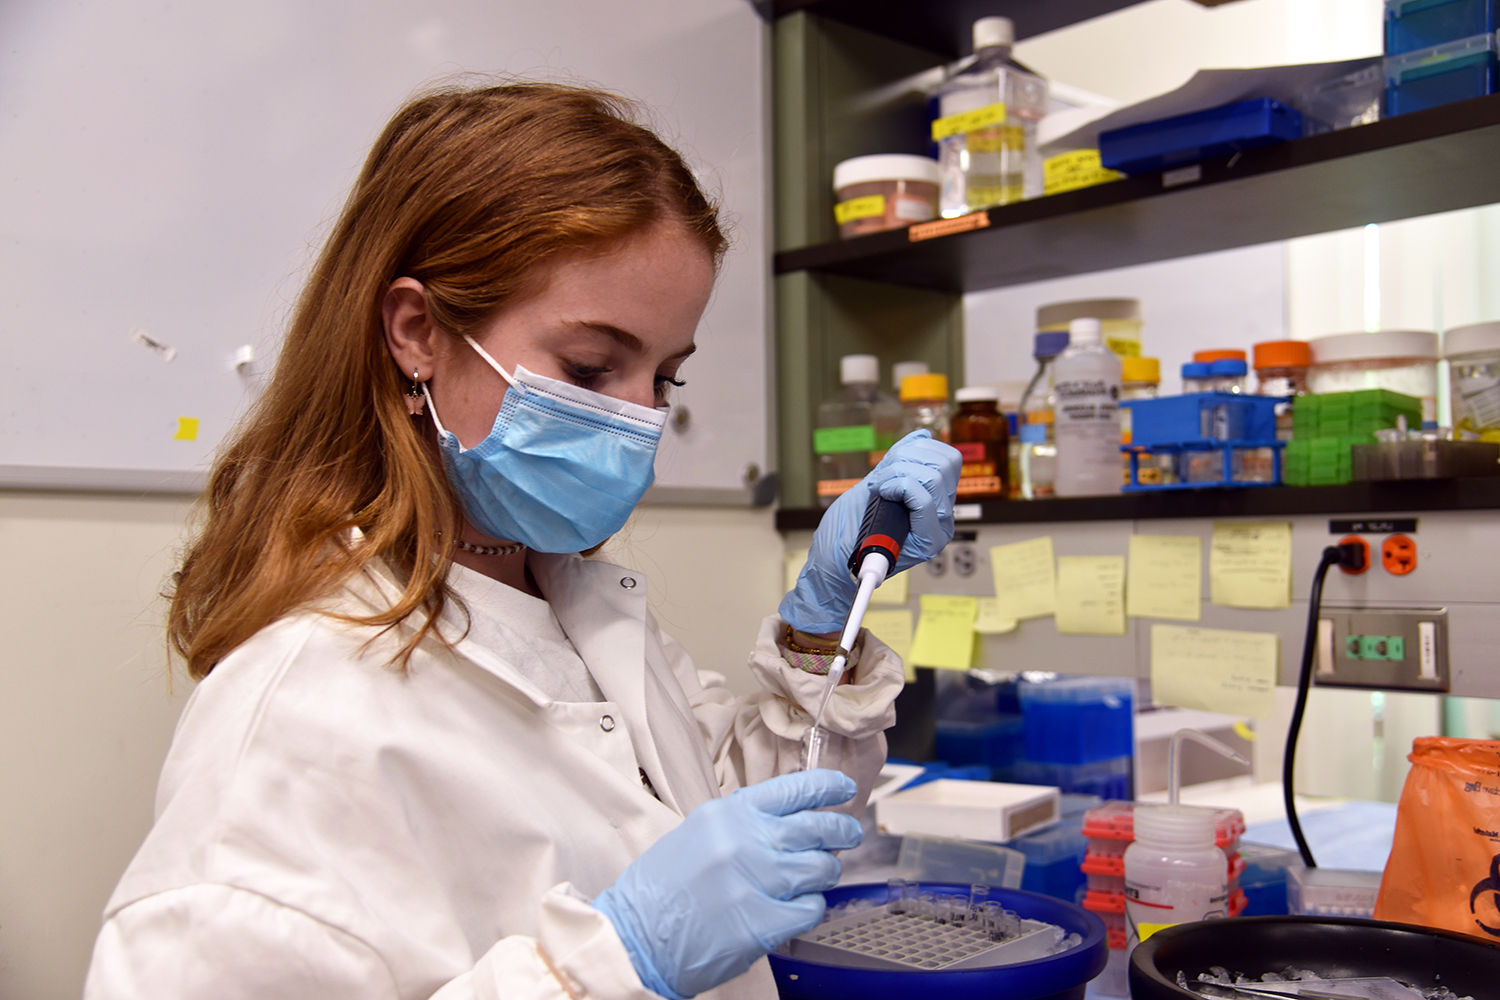 Abigail Interrante works in a lab in the Advanced Technology Laboratory.